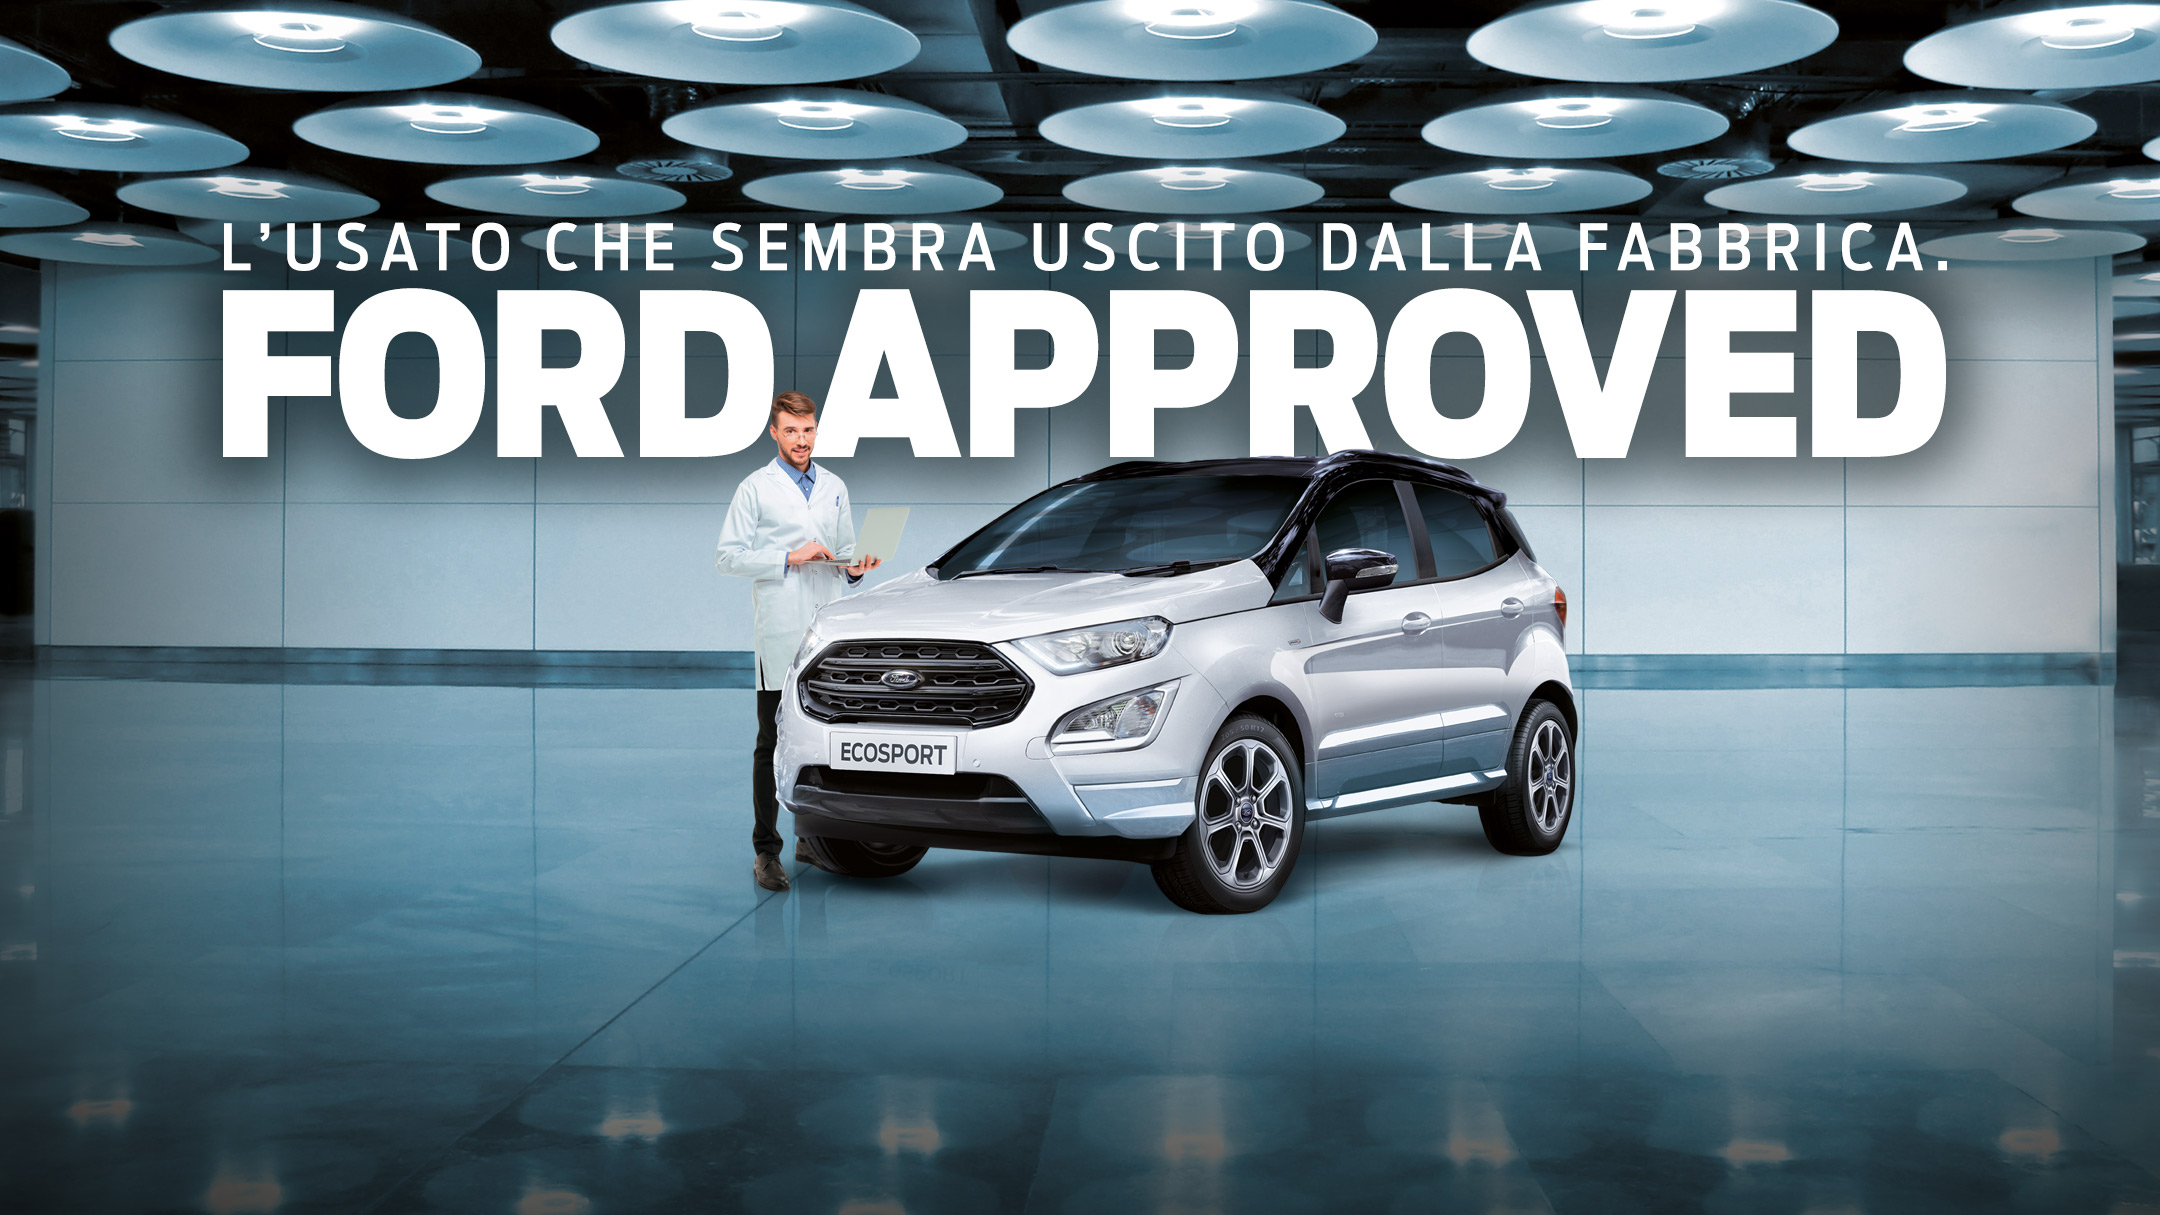 Ford Approved Ecosport Milano